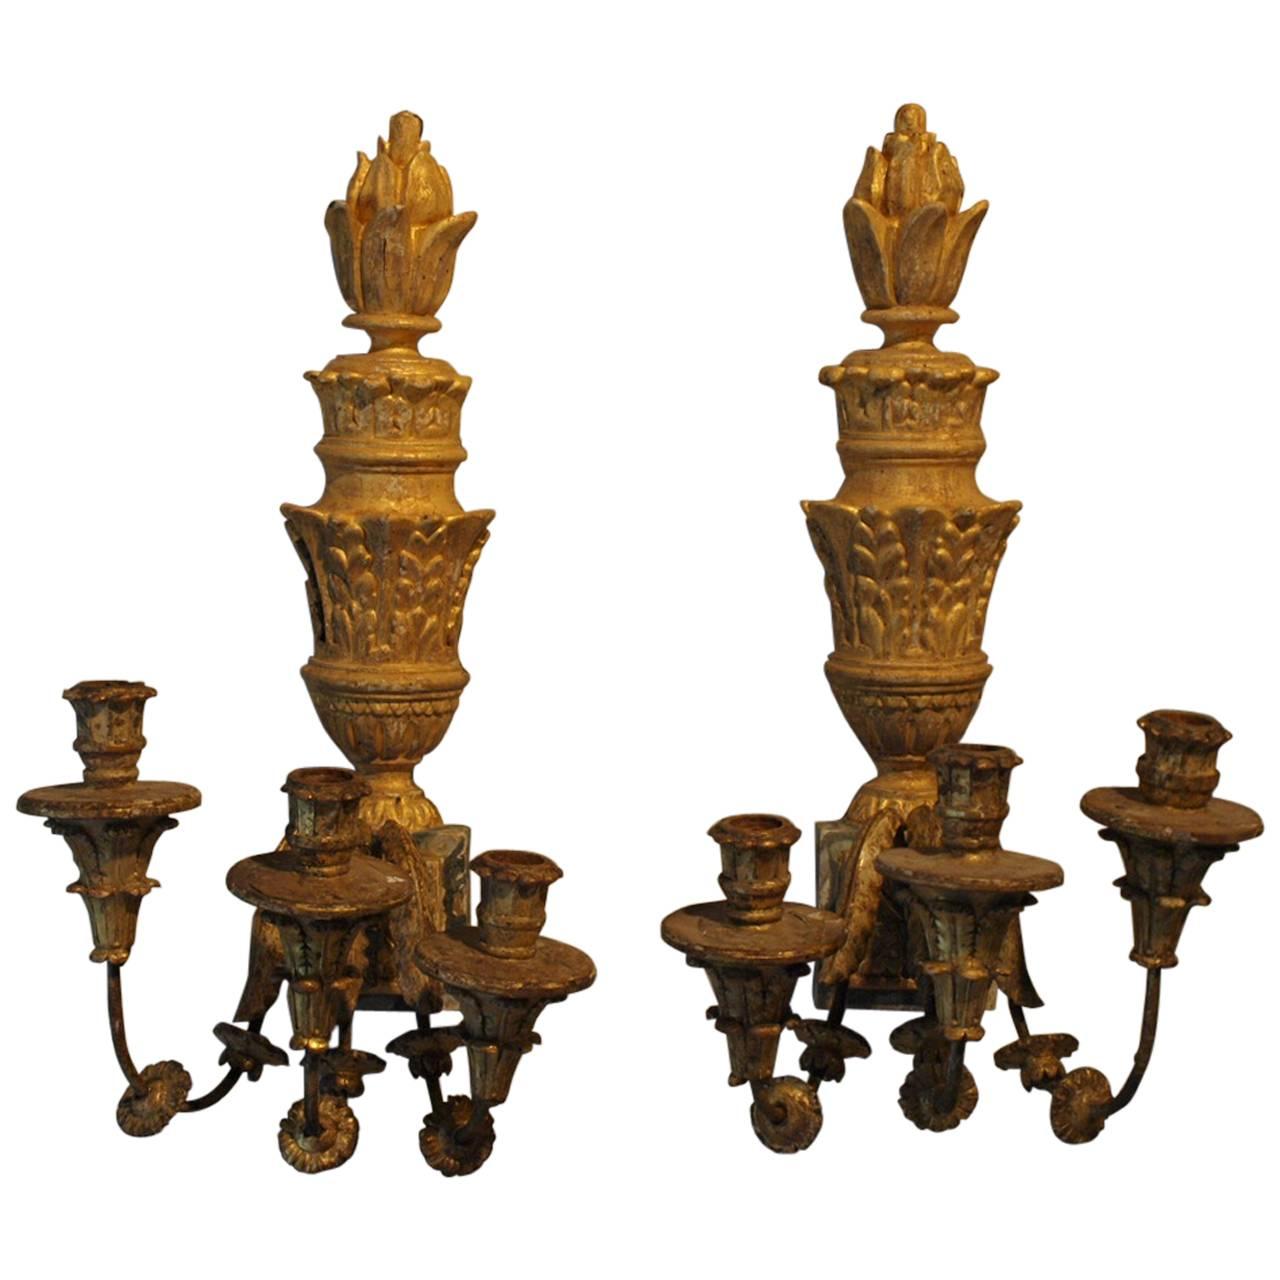 Pair of 18th Century Northern Italian Three-Arm Sconces, Appliques in Giltwood